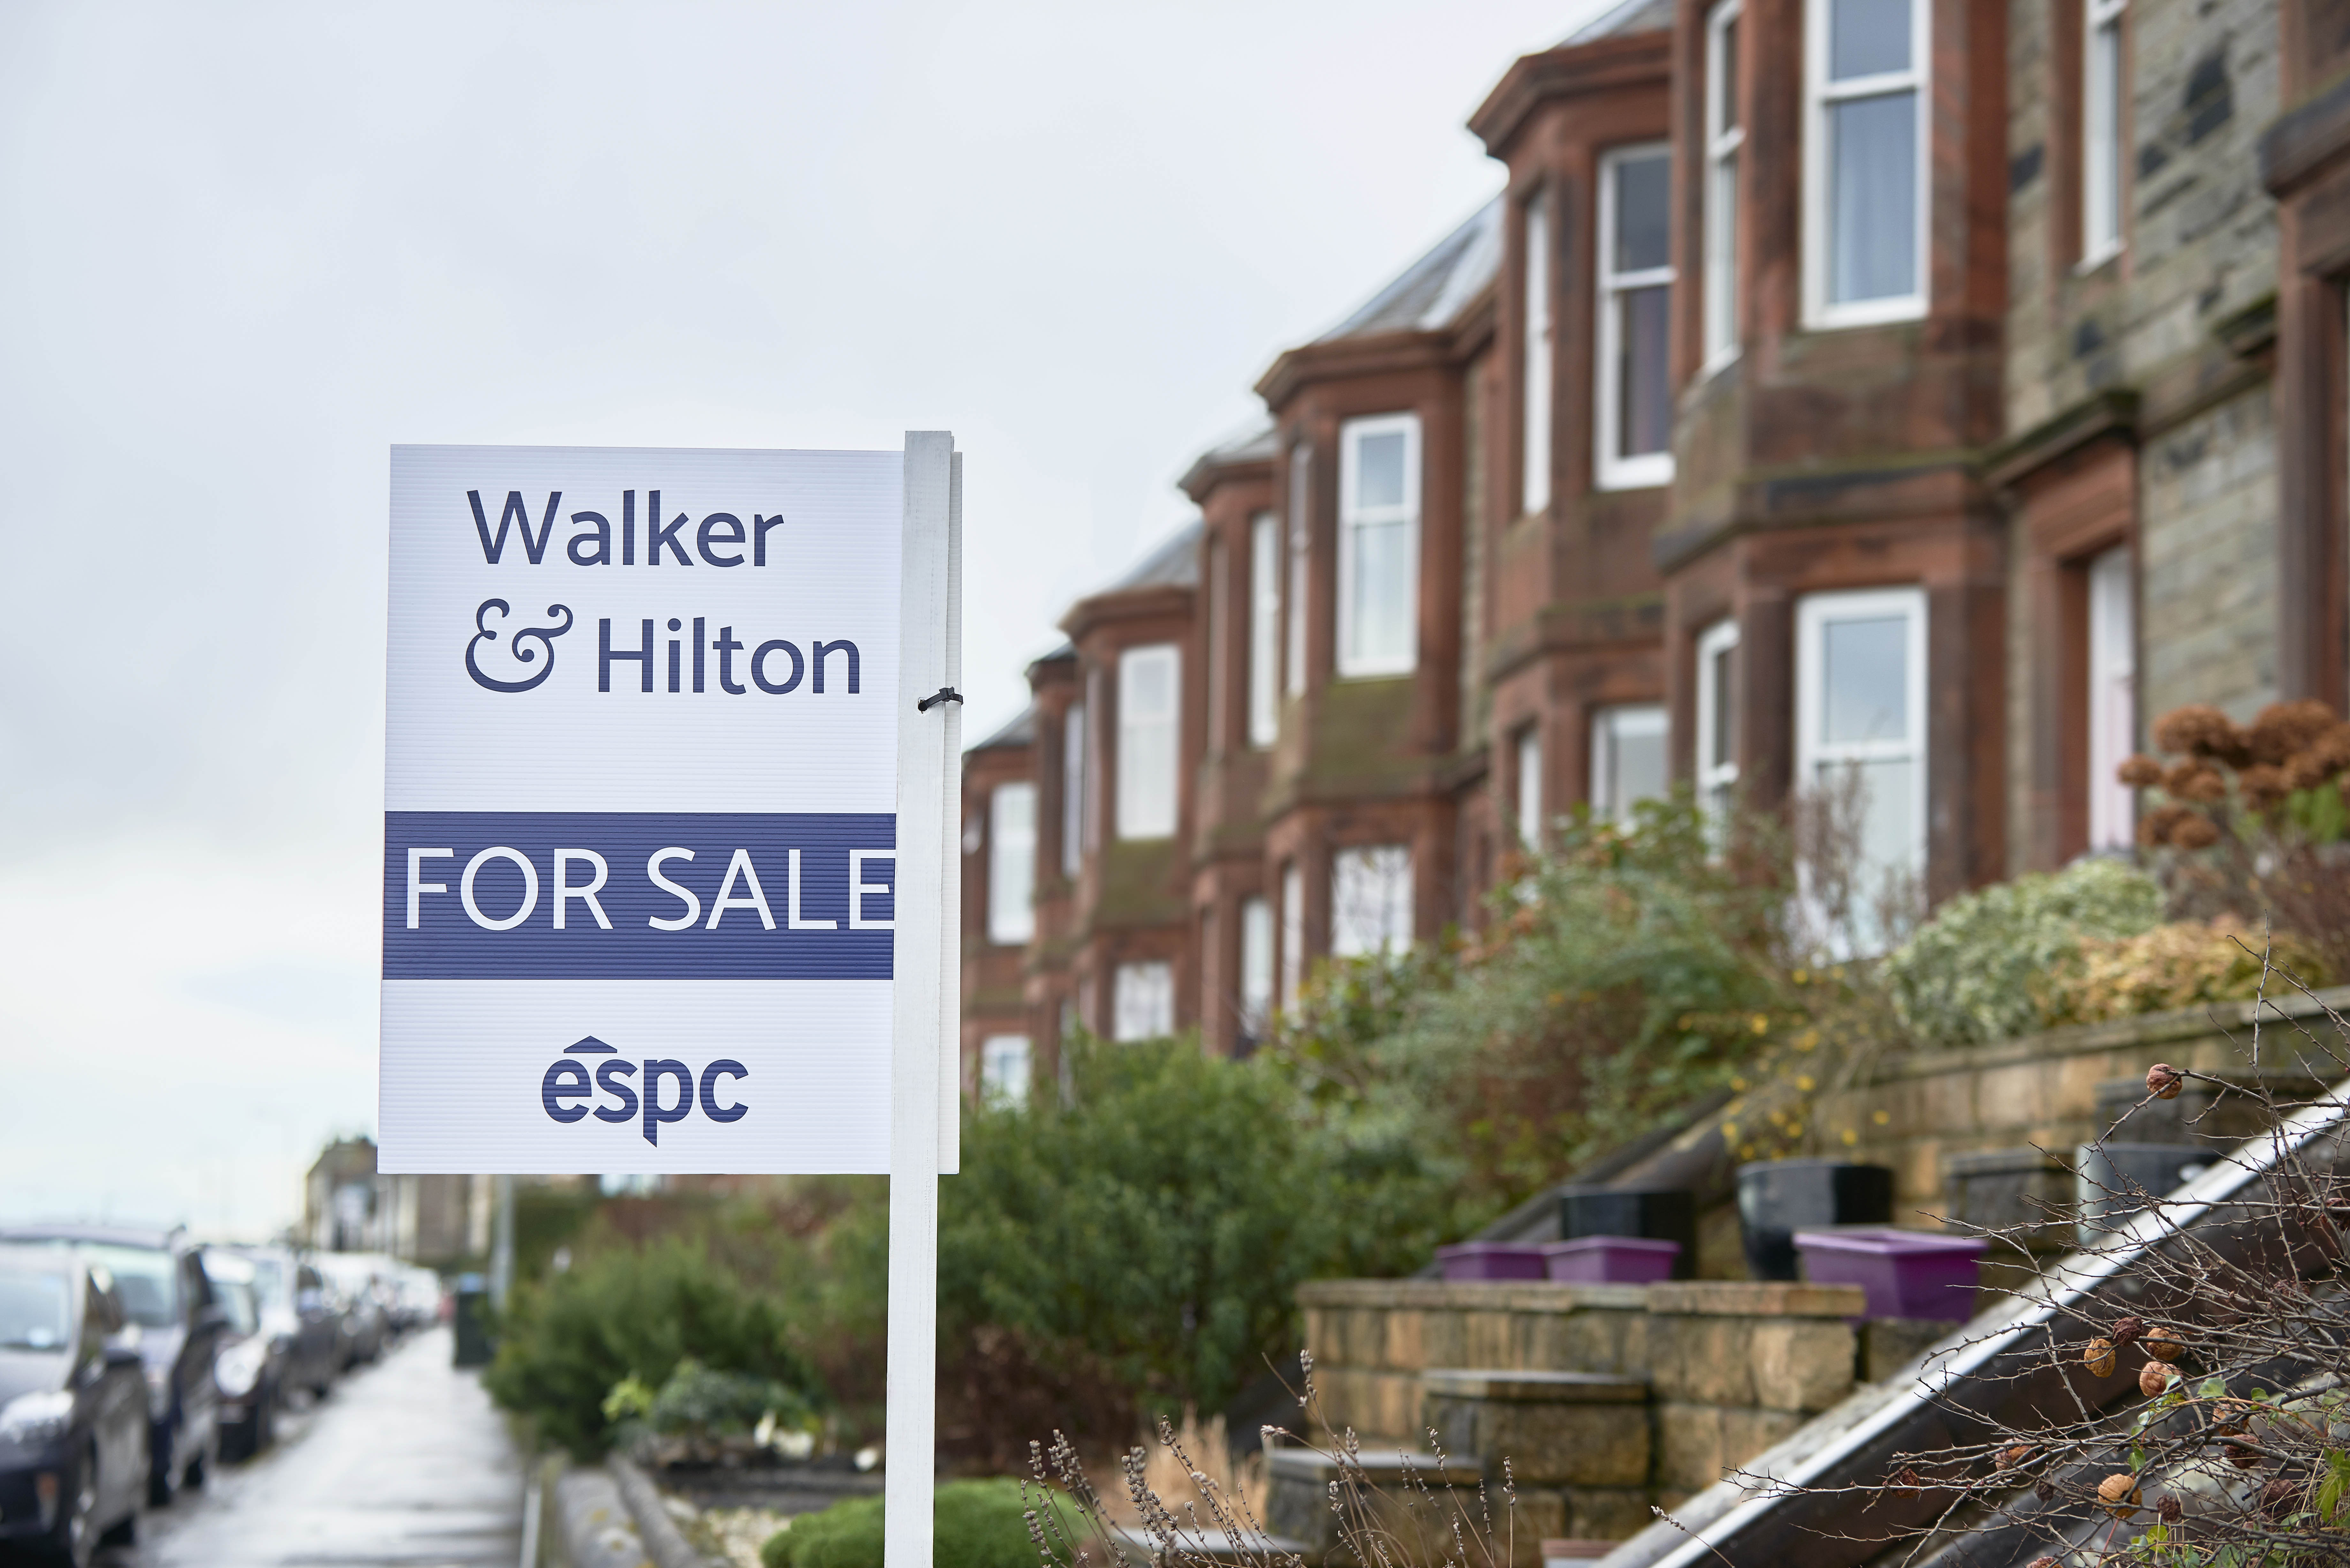 ESPC: Fife and Kinross see faster selling times as fewer homes come to market